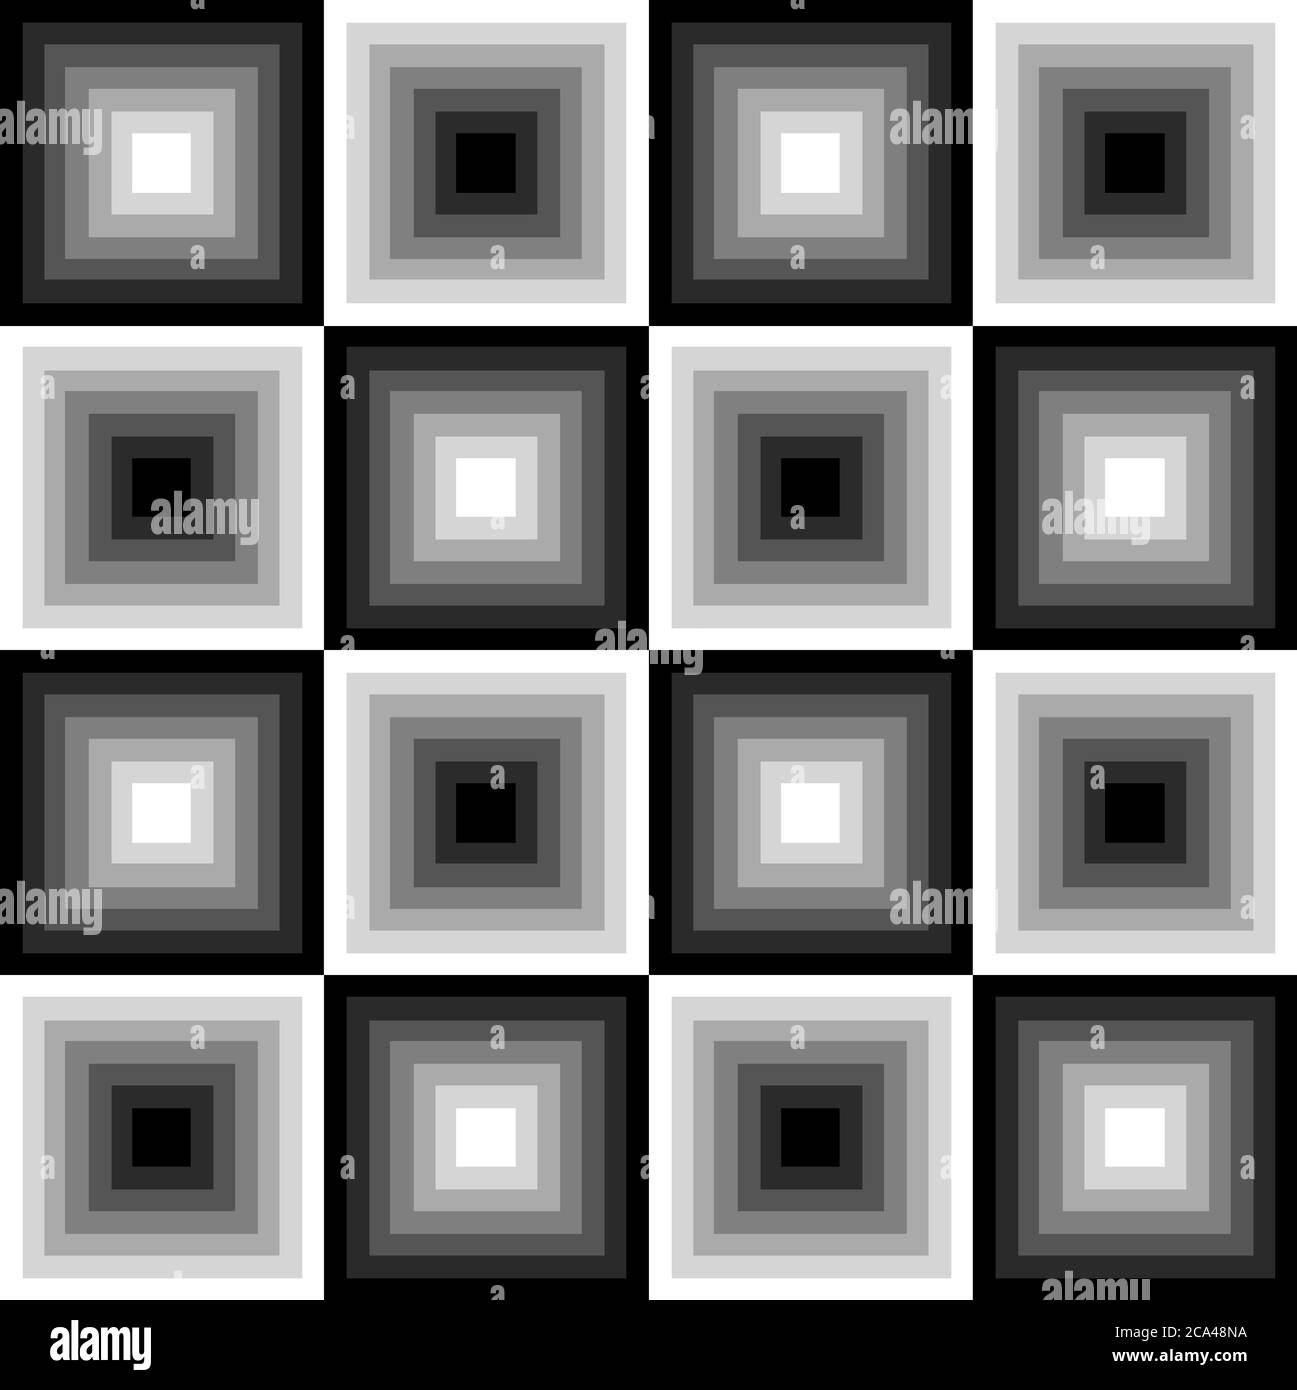 Seamless black and white pattern of squares in a checkerboard pattern Stock Vector